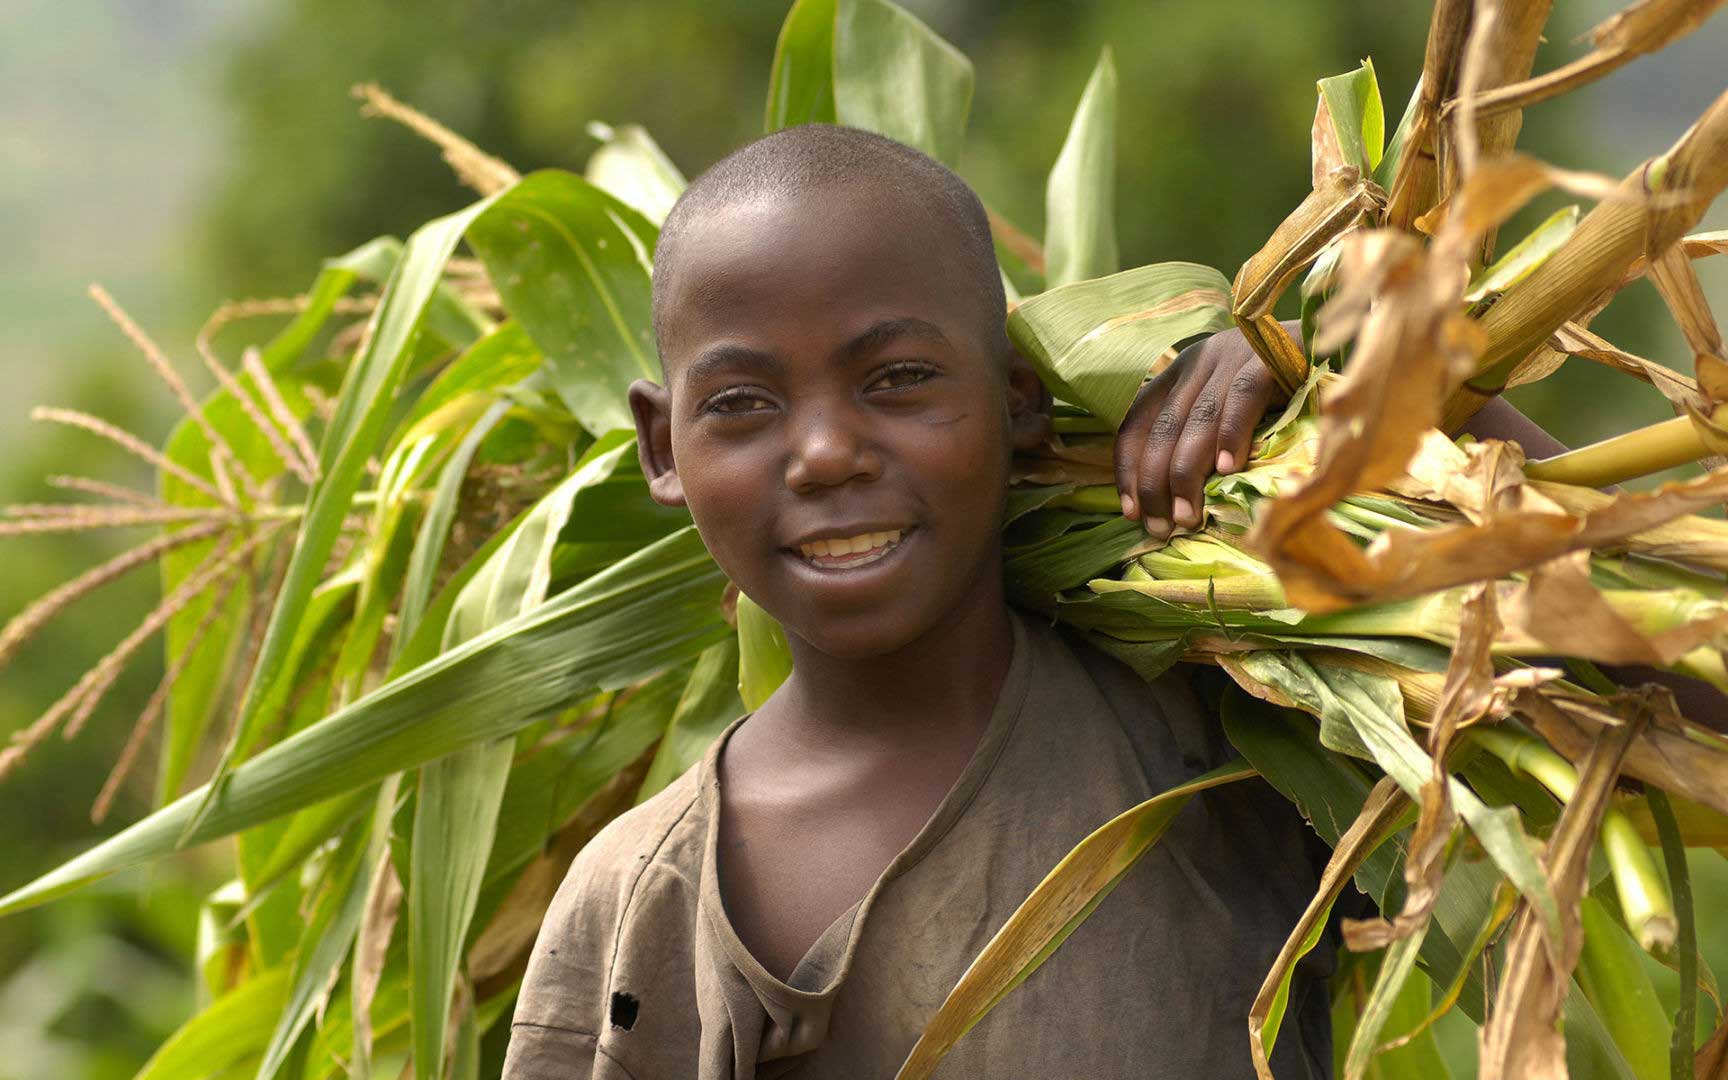 A Compassion sponsored boy helps his family by working in the field